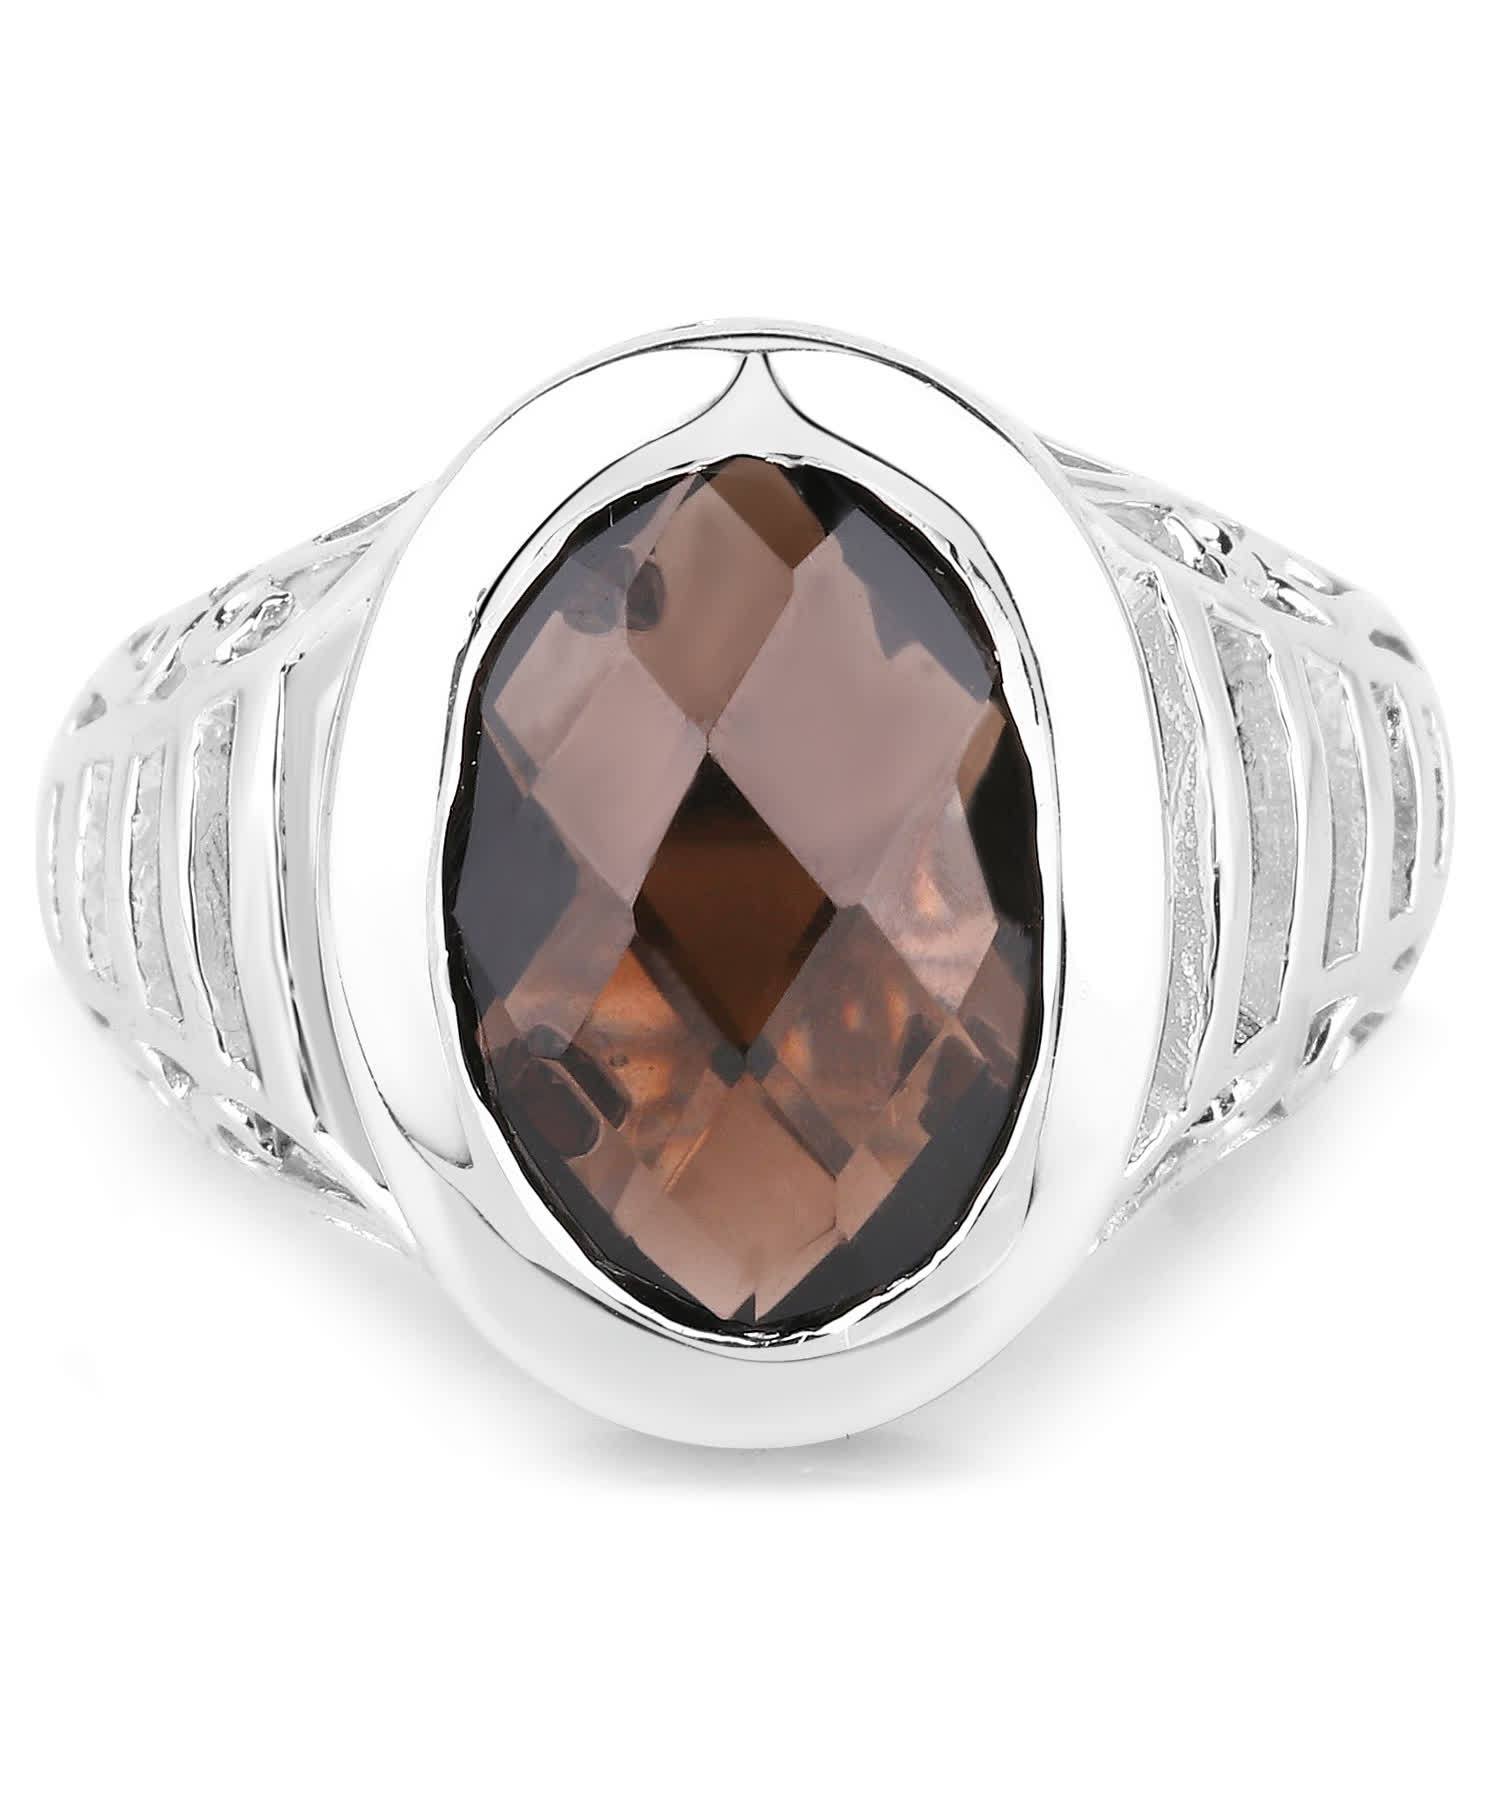 5.46ctw Natural Smoky Quartz Rhodium Plated 925 Sterling Silver Ring View 3